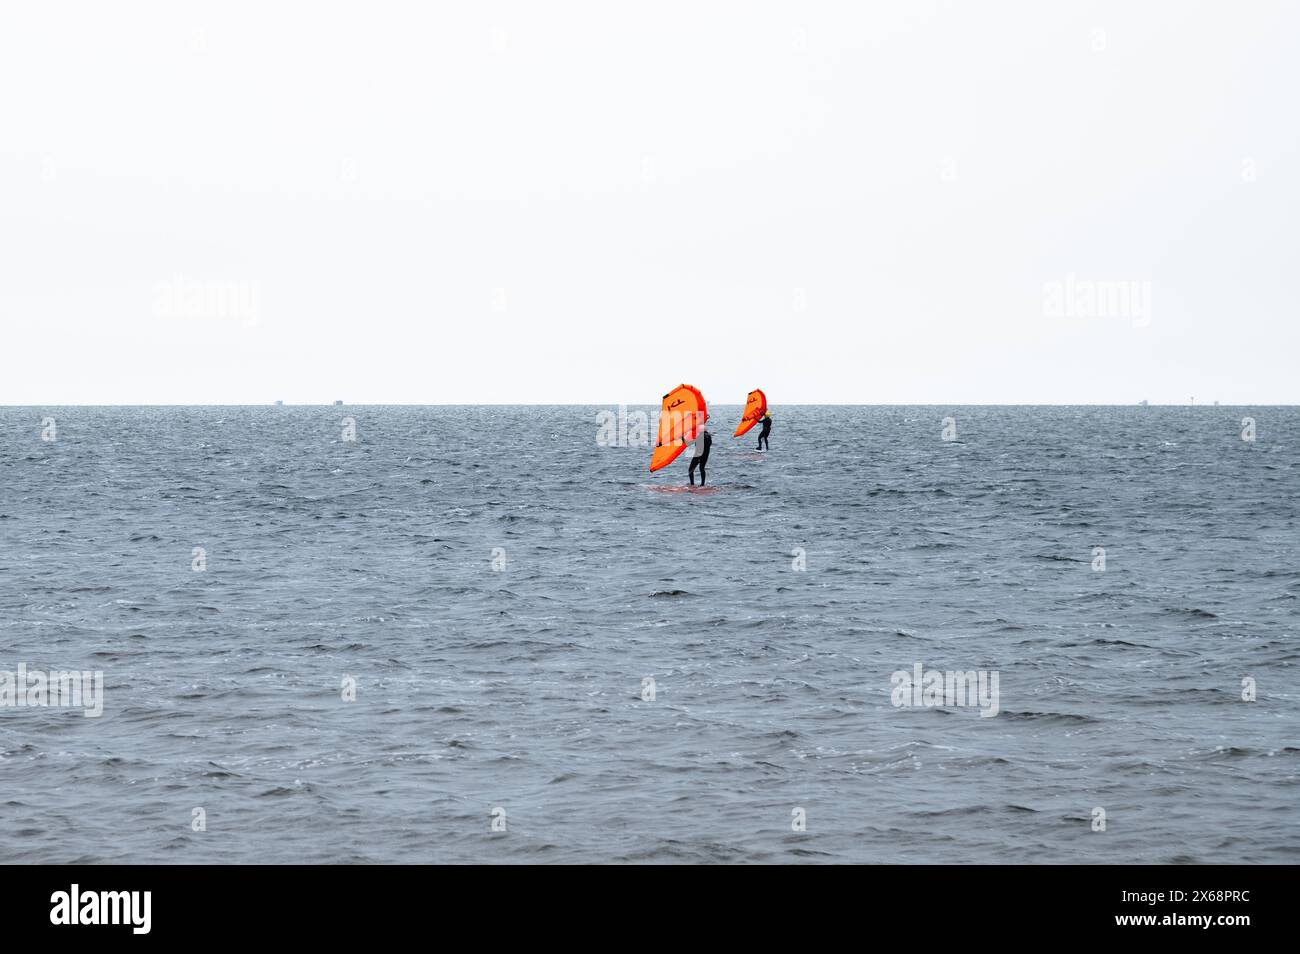 Two windsurfers in  Pamlico Sound, Outer Banks, North Carolina Stock Photo